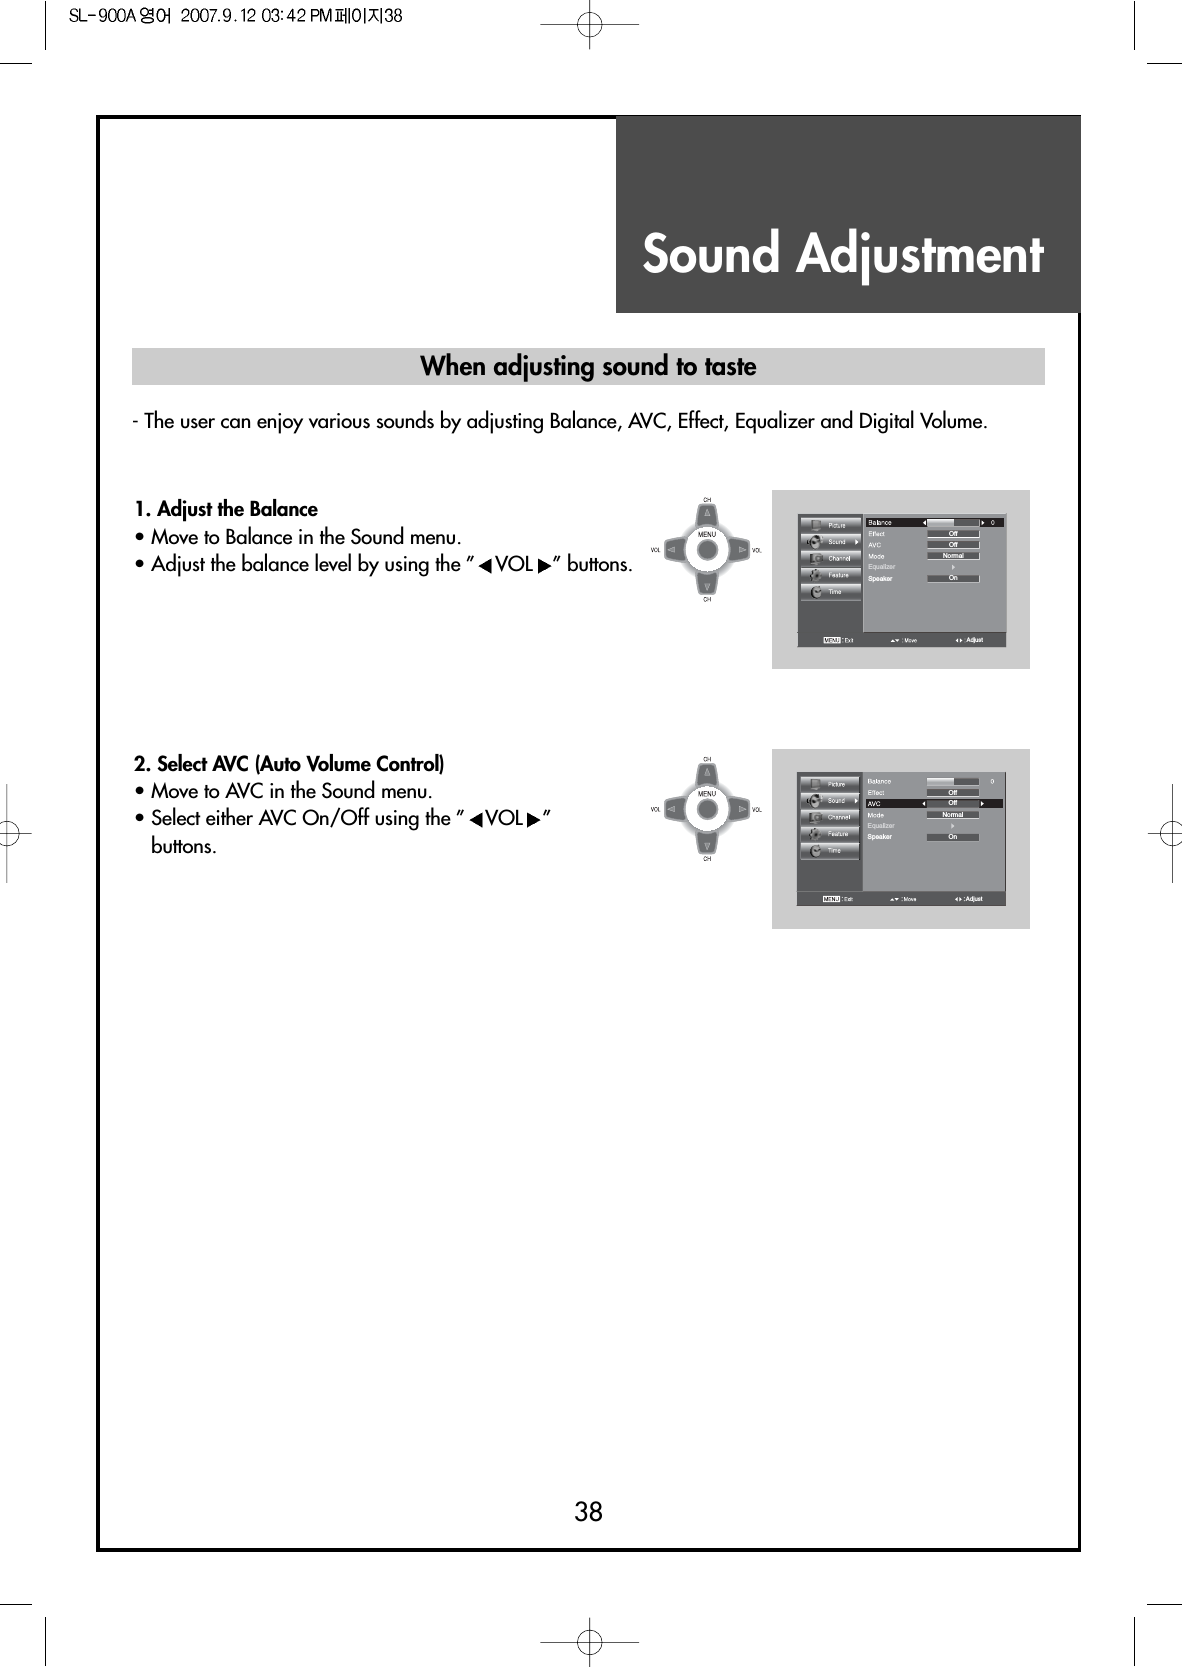 Sound Adjustment38When adjusting sound to taste1. Adjust the Balance                                 • Move to Balance in the Sound menu.• Adjust the balance level by using the ” VOL ” buttons.AdjustEqualizerOnOffNormalSpeakerOff2. Select AVC (Auto Volume Control)                    • Move to AVC in the Sound menu.• Select either AVC On/Off using the ” VOL ”buttons.AdjustEqualizerOnOffNormalSpeakerOff- The user can enjoy various sounds by adjusting Balance, AVC, Effect, Equalizer and Digital Volume.